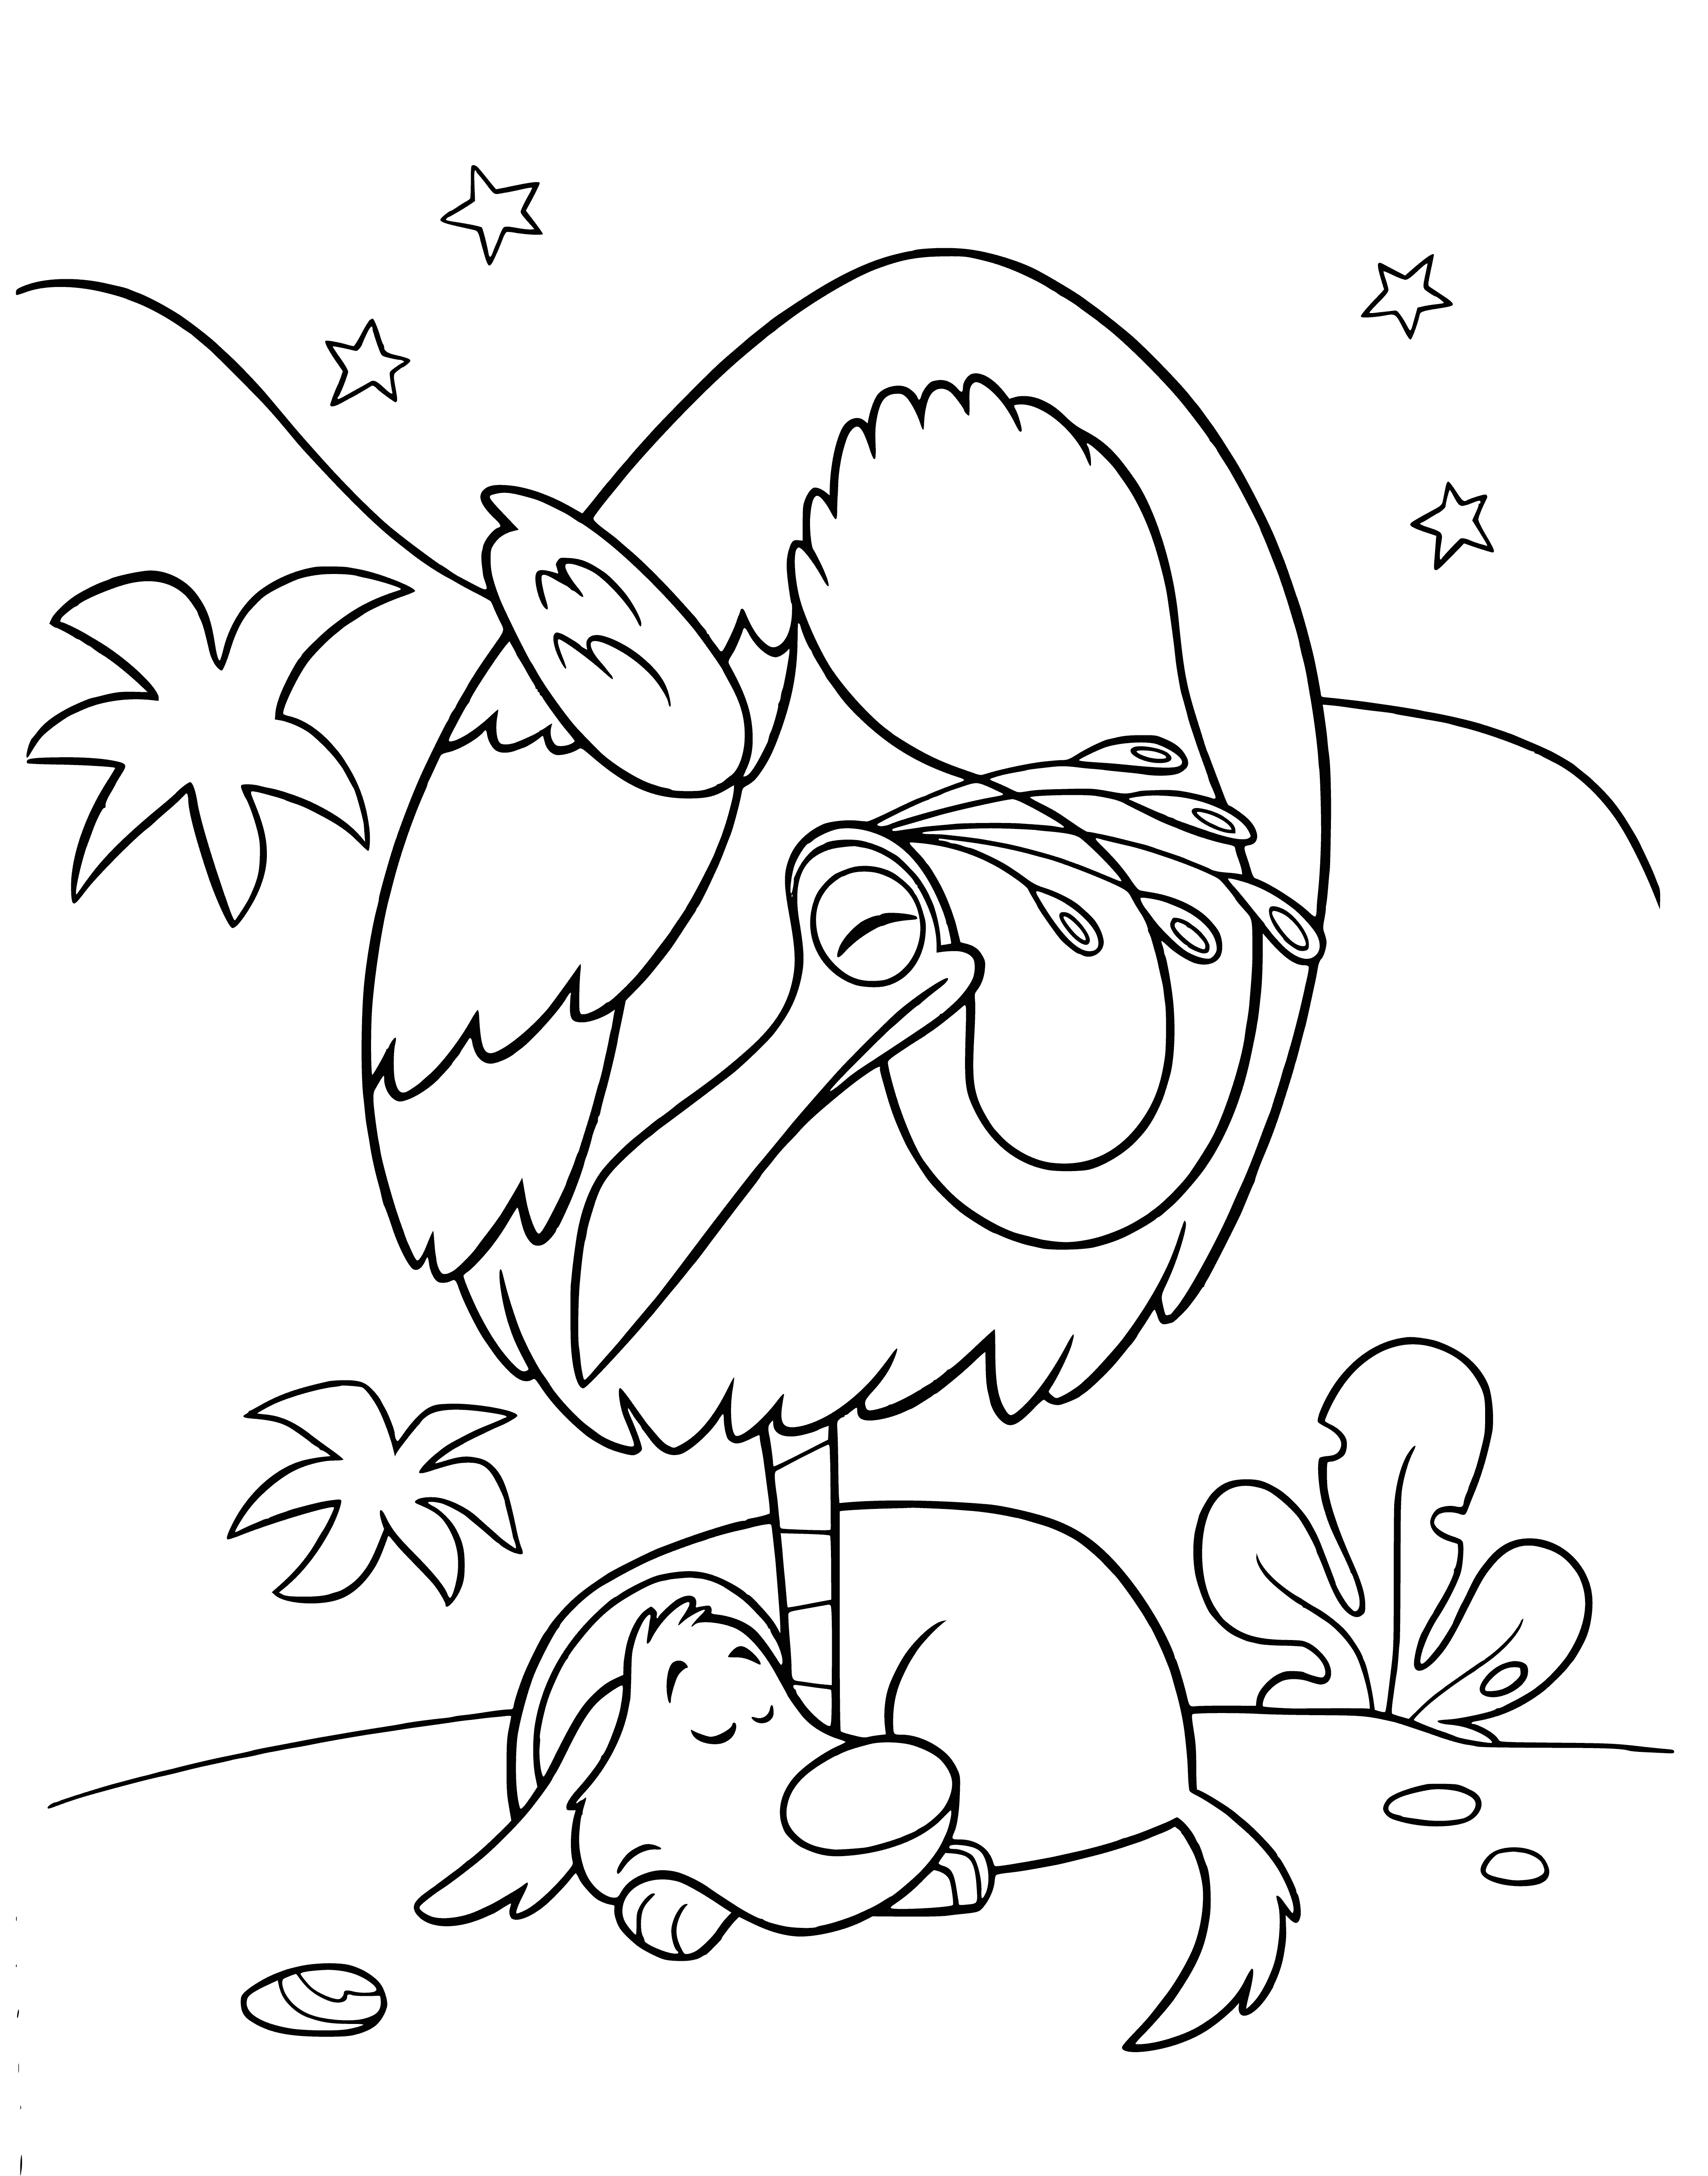 coloring page: Bird perched on yellow dog, wings outstretched. Dog looking back at bird.